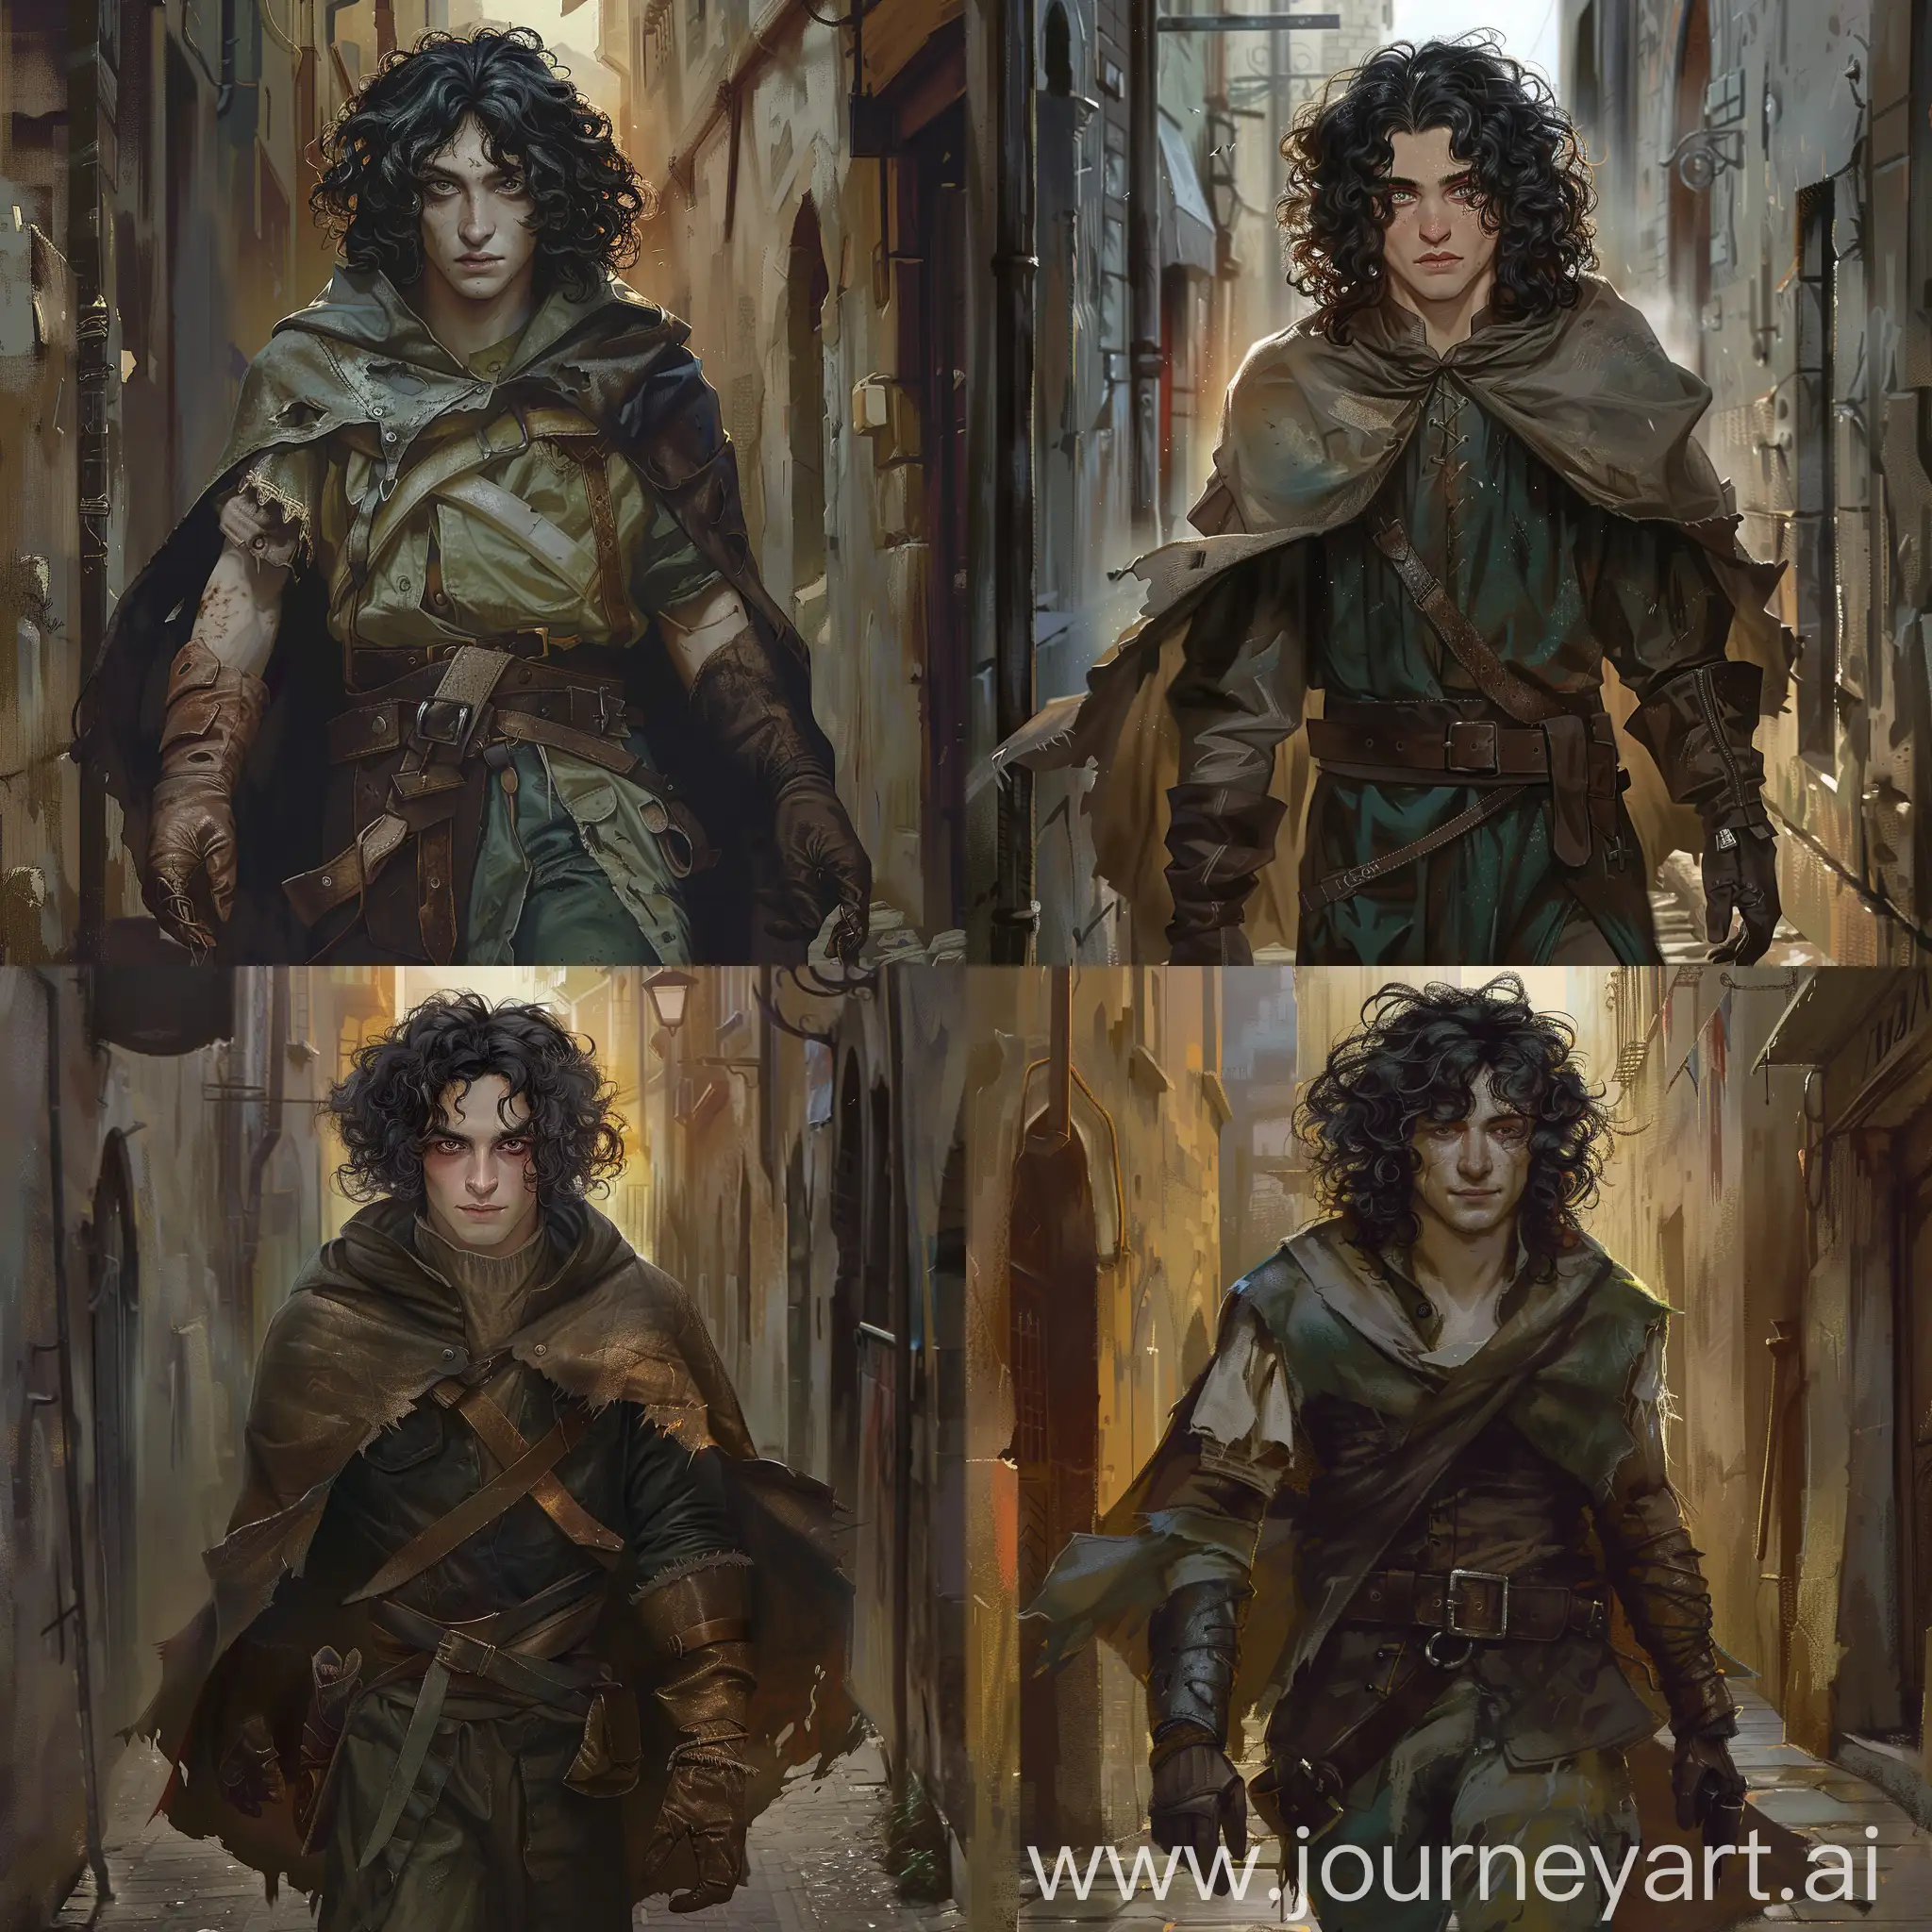 Draw a realistic art of a character from the Dungeons and Dragons universe according to the following description: He is a 20 years old human male artificer with over the shoulder length black curly hair and dark grey eyes. He has pale white skin, and a very slim tall build. His young face is clean shaven.
He wears an old leather poncho and long brown leather gloves over a cheap green working clothes. 
His clothes and face are dirty with grime from his hard work. 
He is making his way through an alley with a sun setting.